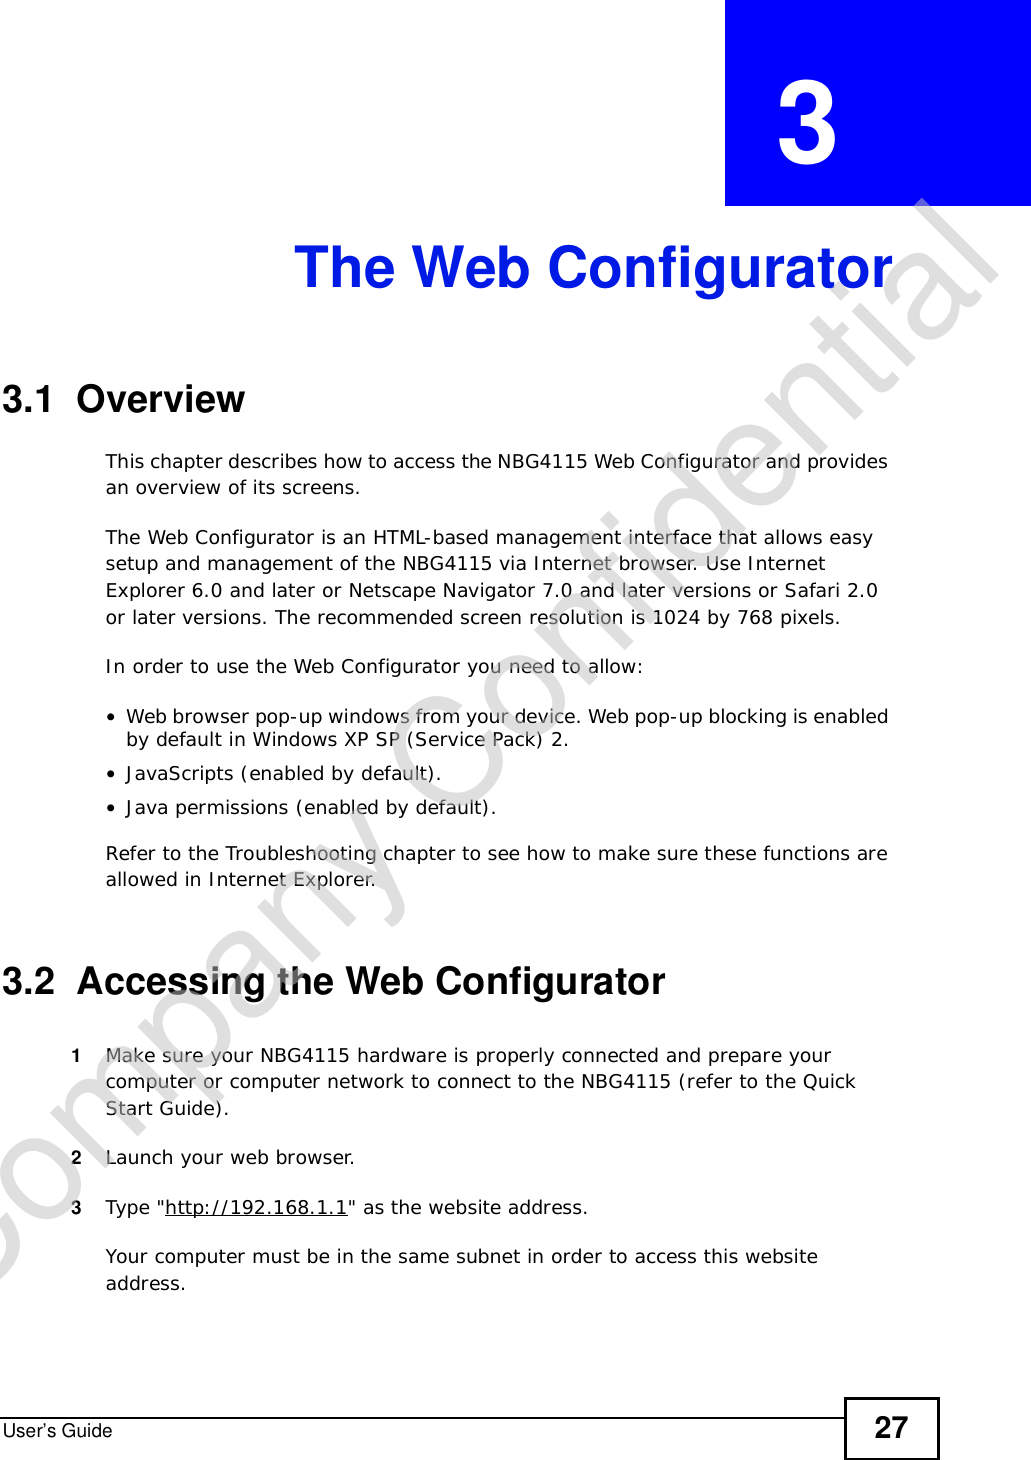 User’s Guide 27CHAPTER  3 The Web Configurator3.1  OverviewThis chapter describes how to access the NBG4115 Web Configurator and provides an overview of its screens.The Web Configurator is an HTML-based management interface that allows easy setup and management of the NBG4115 via Internet browser. Use Internet Explorer 6.0 and later or Netscape Navigator 7.0 and later versions or Safari 2.0 or later versions. The recommended screen resolution is 1024 by 768 pixels.In order to use the Web Configurator you need to allow:•Web browser pop-up windows from your device. Web pop-up blocking is enabled by default in Windows XP SP (Service Pack) 2.•JavaScripts (enabled by default).•Java permissions (enabled by default).Refer to the Troubleshooting chapter to see how to make sure these functions are allowed in Internet Explorer.3.2  Accessing the Web Configurator1Make sure your NBG4115 hardware is properly connected and prepare your computer or computer network to connect to the NBG4115 (refer to the Quick Start Guide).2Launch your web browser.3Type &quot;http://192.168.1.1&quot; as the website address. Your computer must be in the same subnet in order to access this website address.Company Confidential